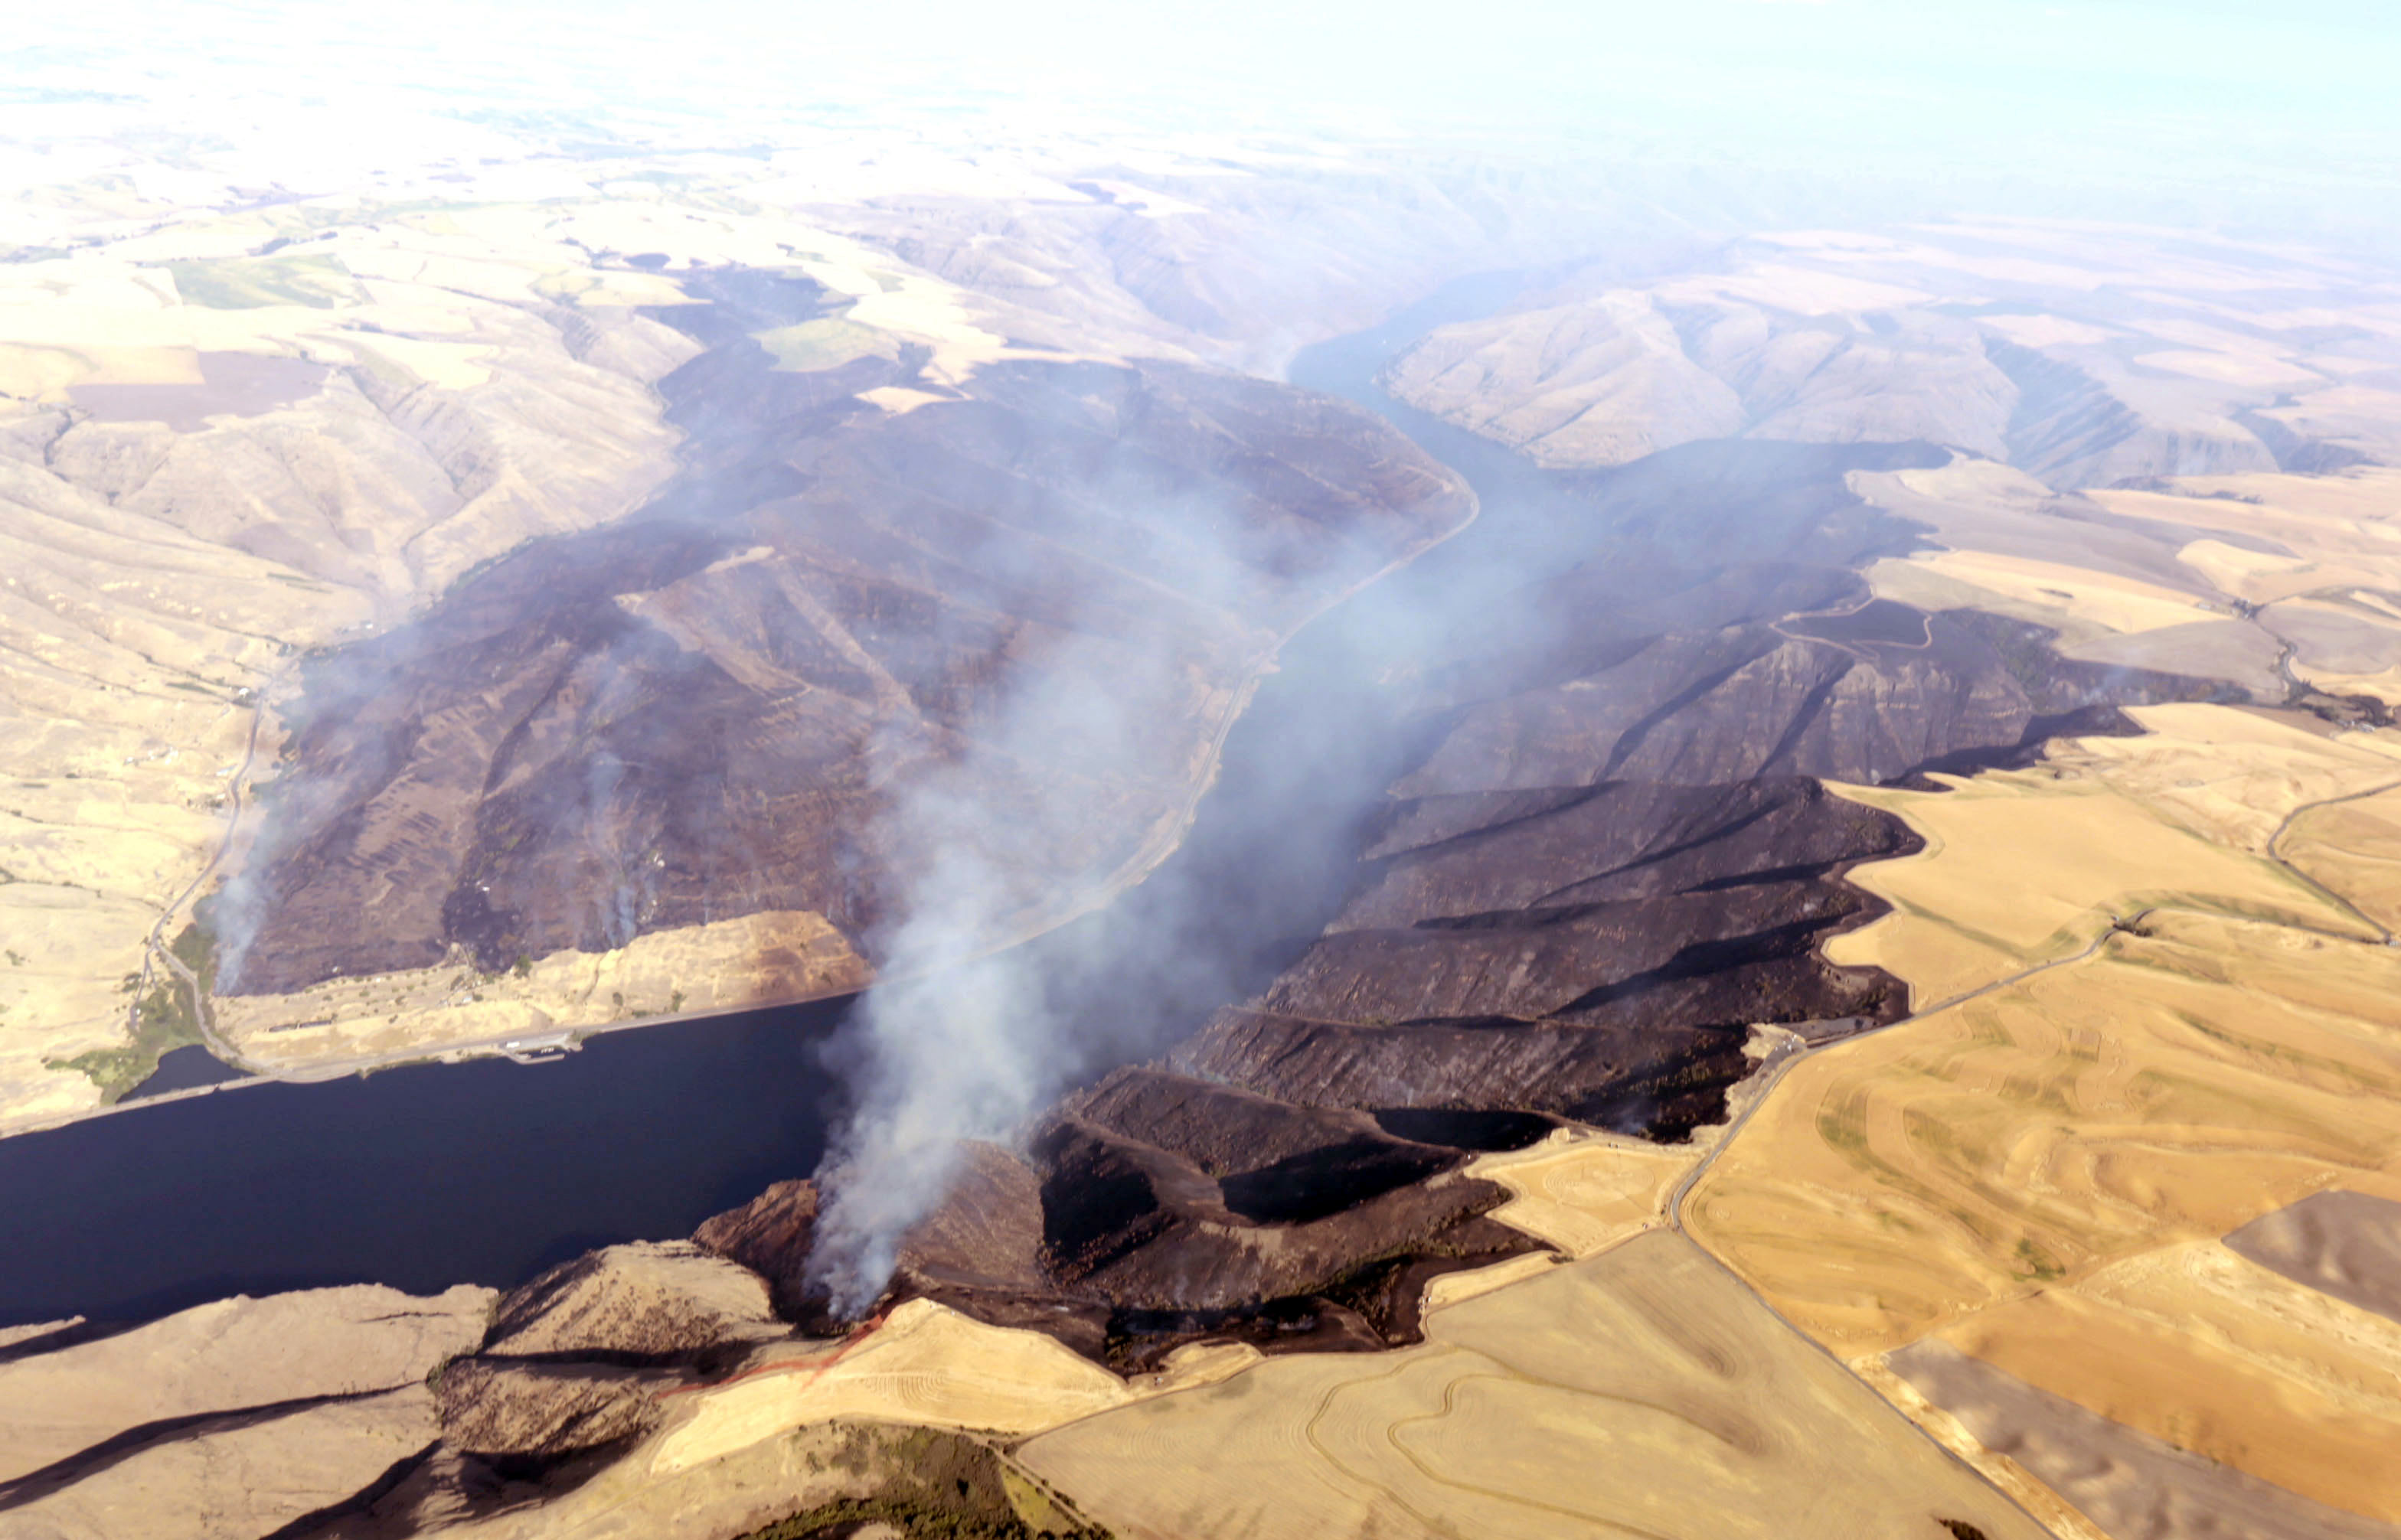 The Snake River Complex Fire continues to burn on both sides of the river west of Colton, Wash., on Wednesday, Aug. 3, 2016. The state of Washington is managing firefighters and aircraft that are fighting the 10,000 fire, which was 10-percent contained as of Wednesday evening. Three college-age men admitted to the Whitman County Sheriff's Office on Wednesday that they lit a campfire near the are where the fire started. The fire started in Garfield County and the jumped the Snake River into Whitman County.